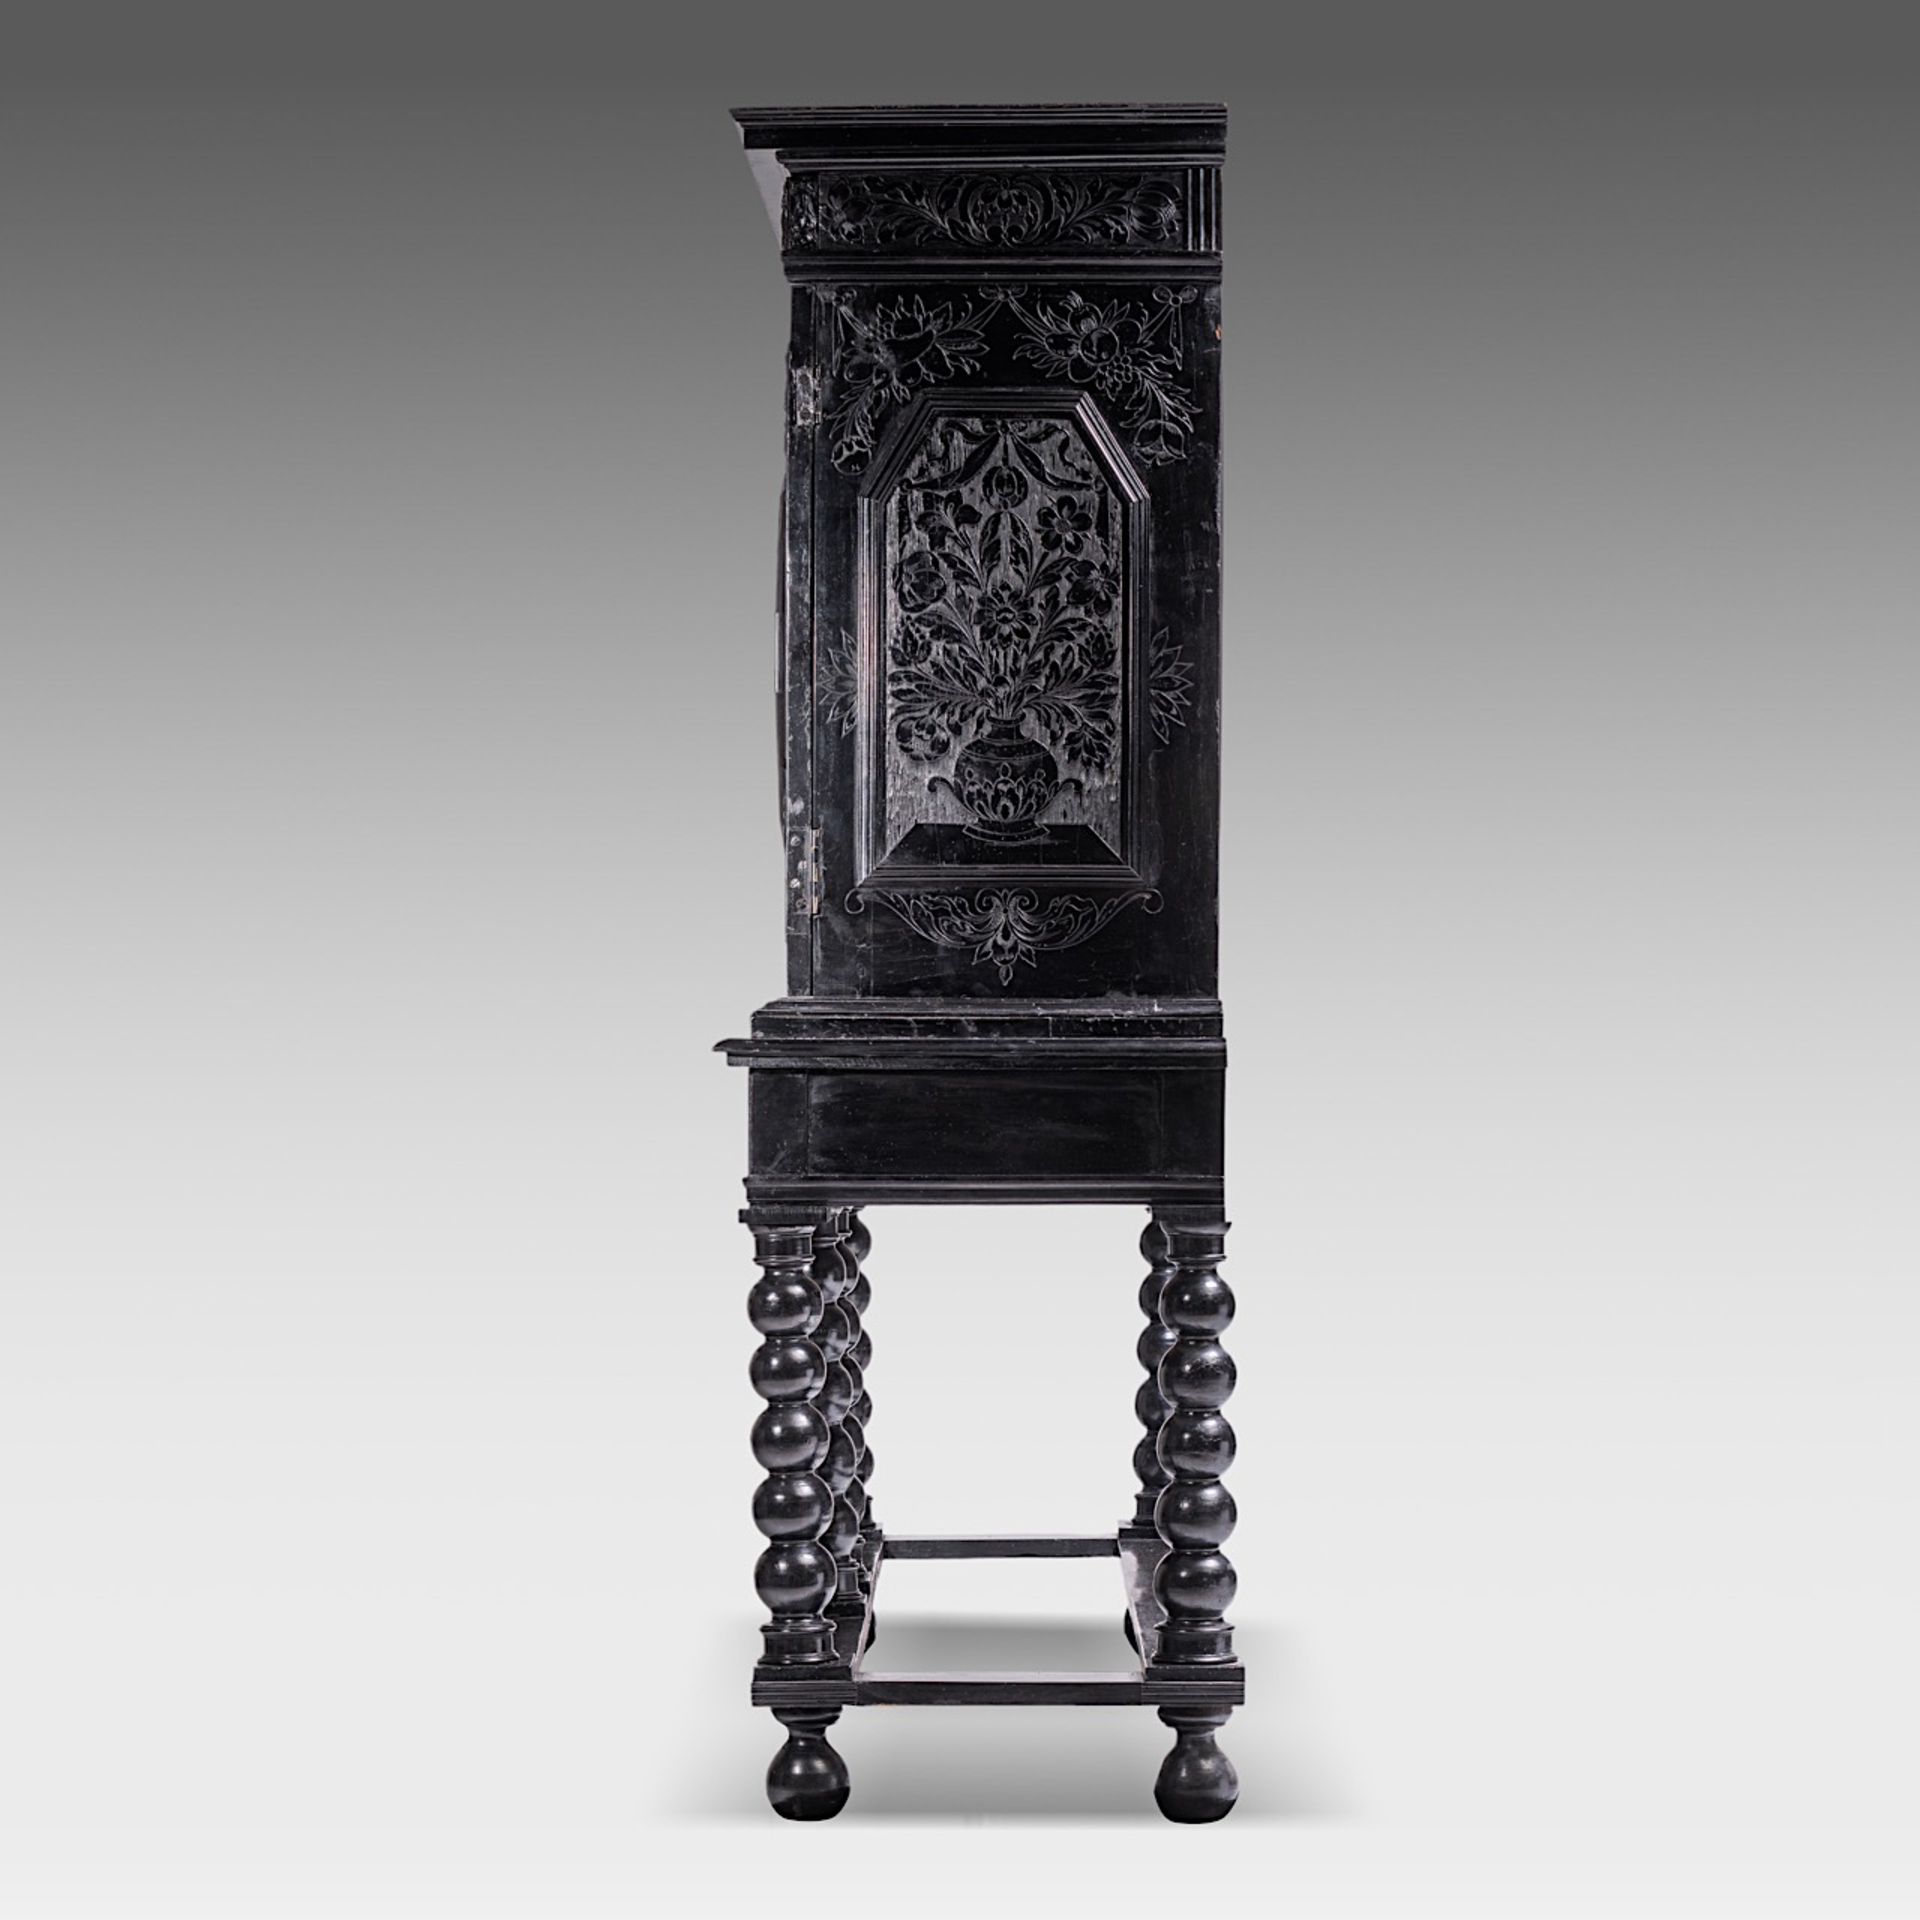 PREMIUM LOT - An exceptional 17thC French ebony and ebonised cabinet-on-stand, H 181,5 - W 163 - D 5 - Bild 5 aus 14